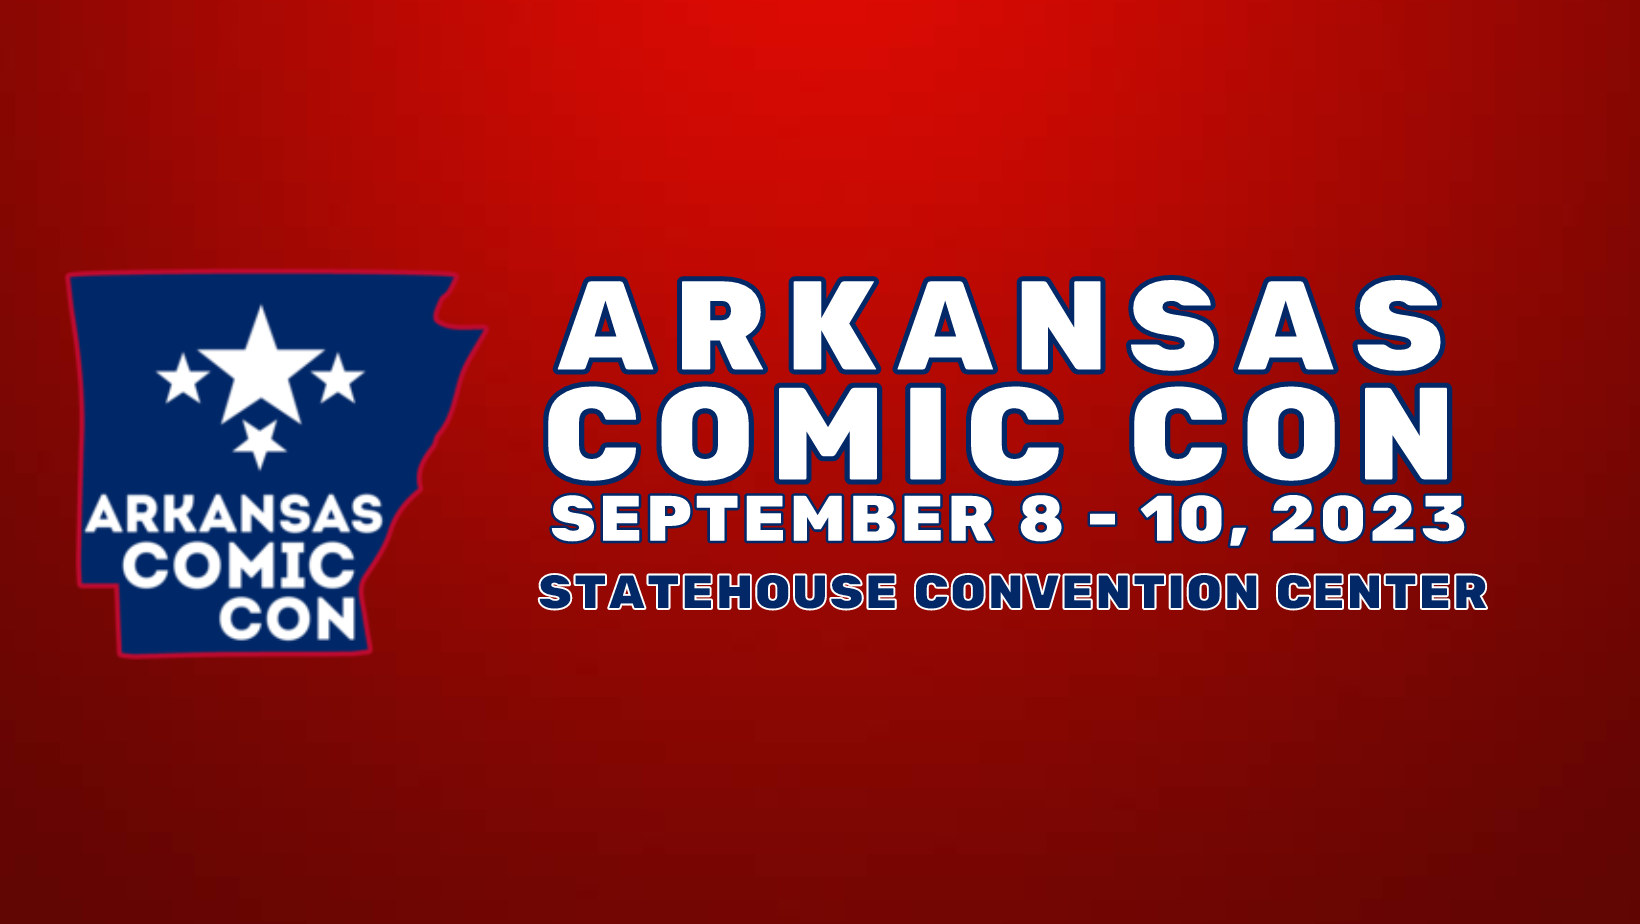 Memphis' Anime Blues Con weekend features cosplay, community building